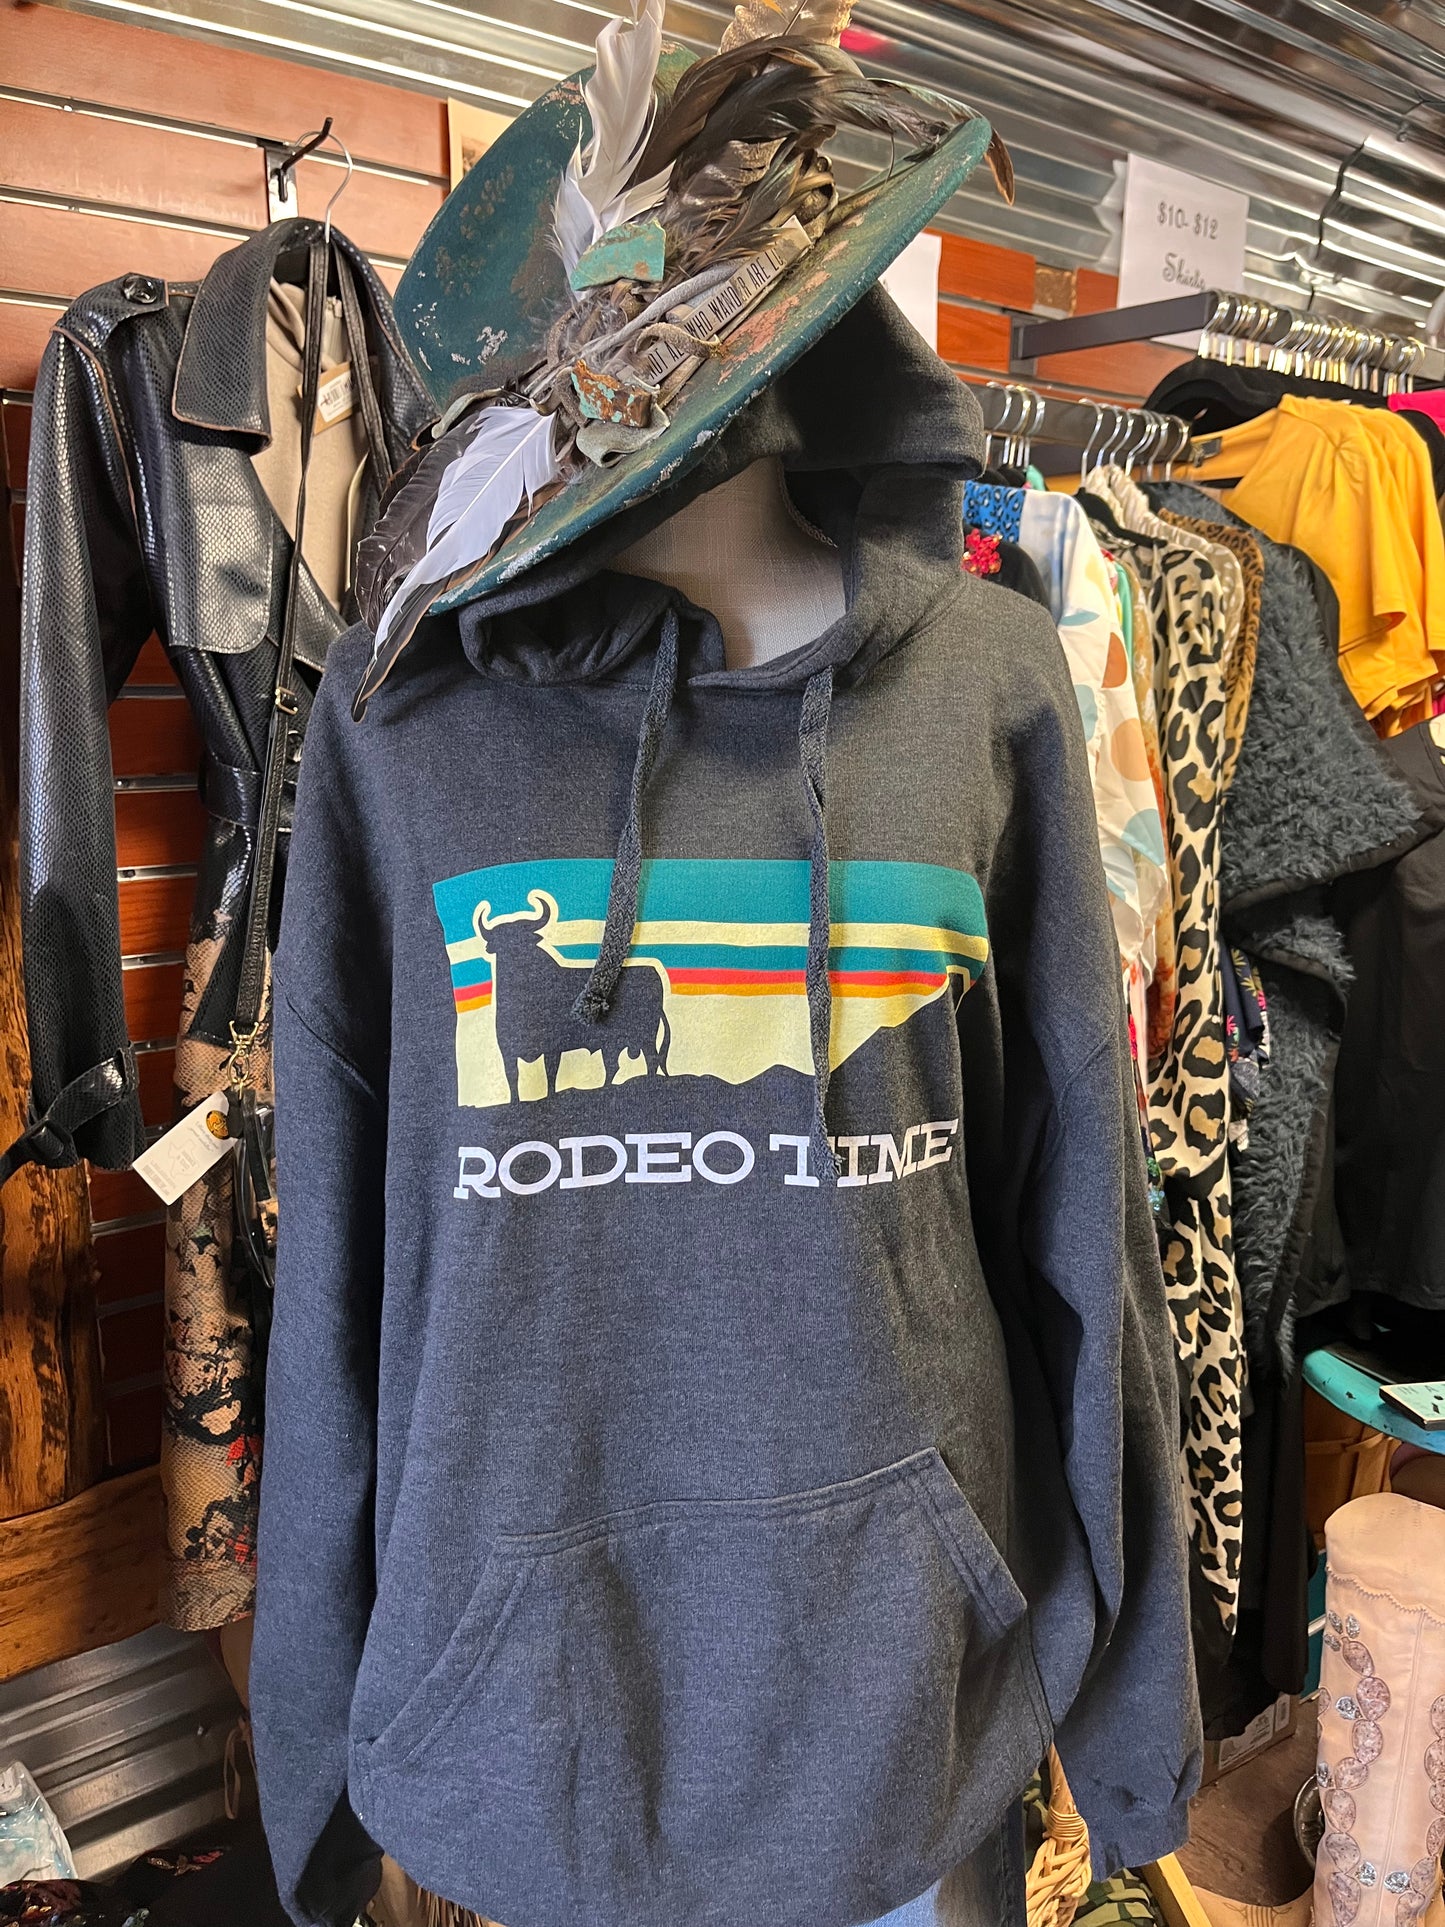 Sunset Rodeo Time Hoodie (adult) - Dale Brisby